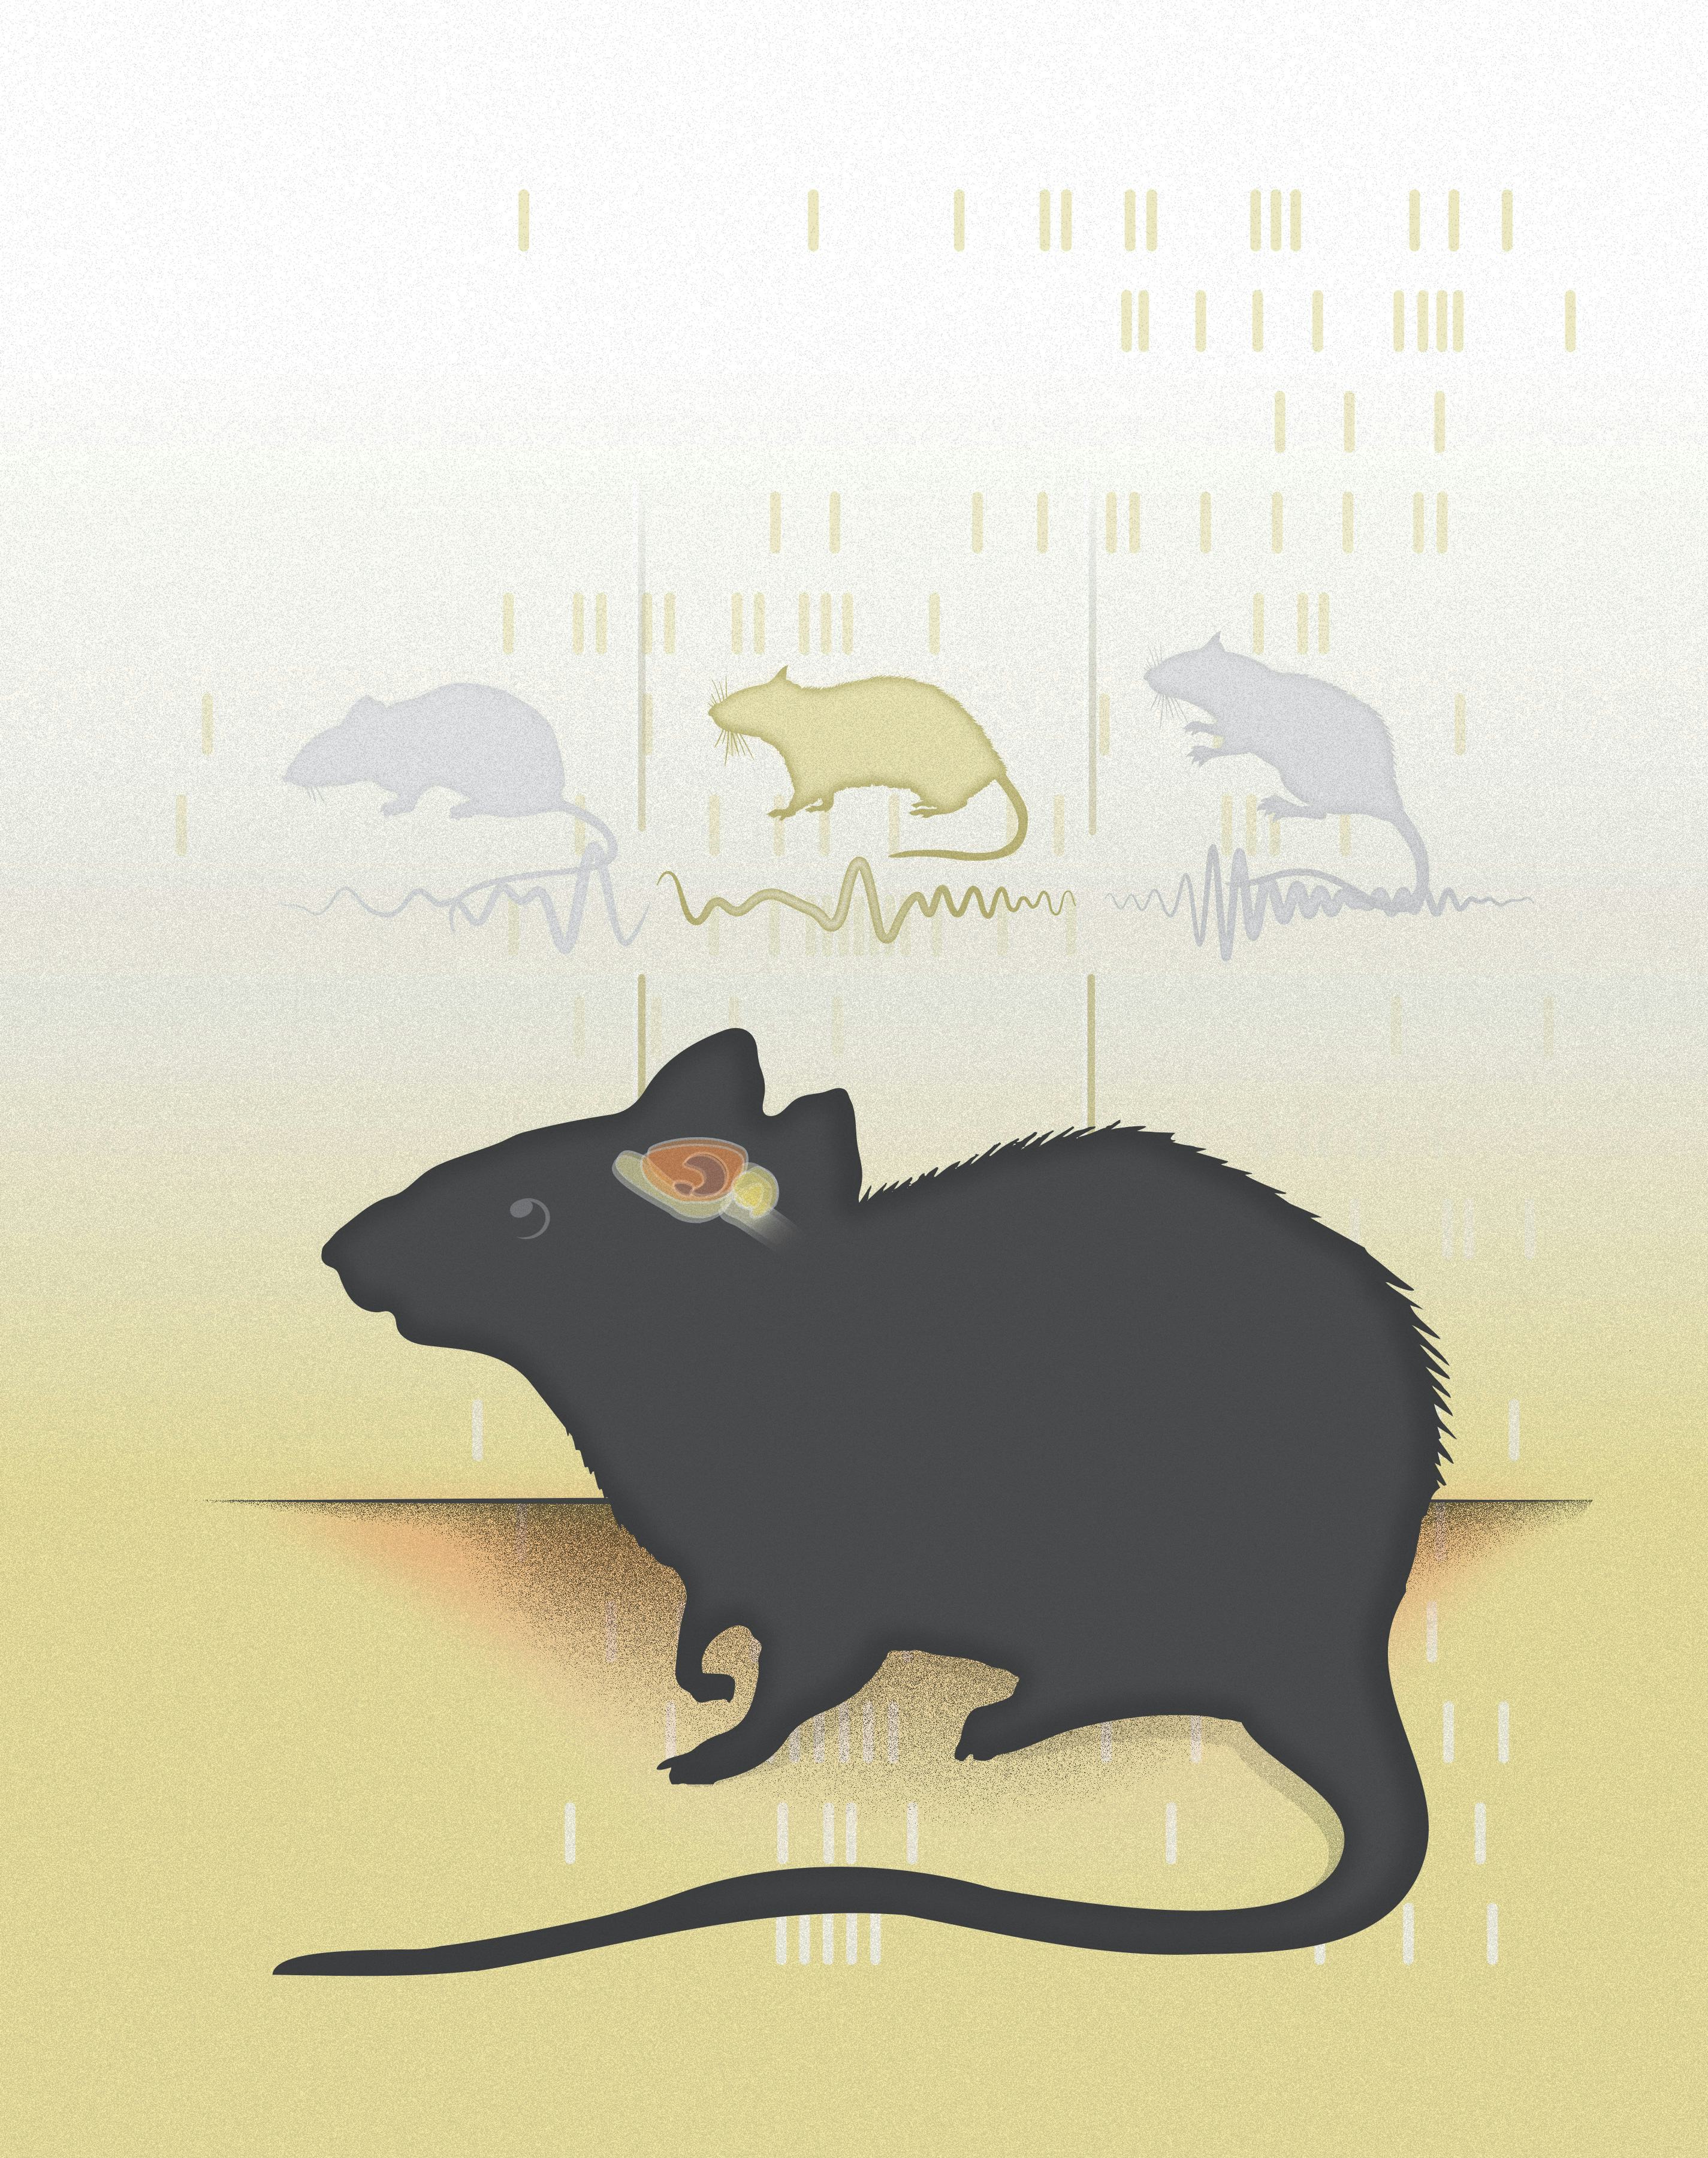 Illustration showing thoughts in a rat's brain